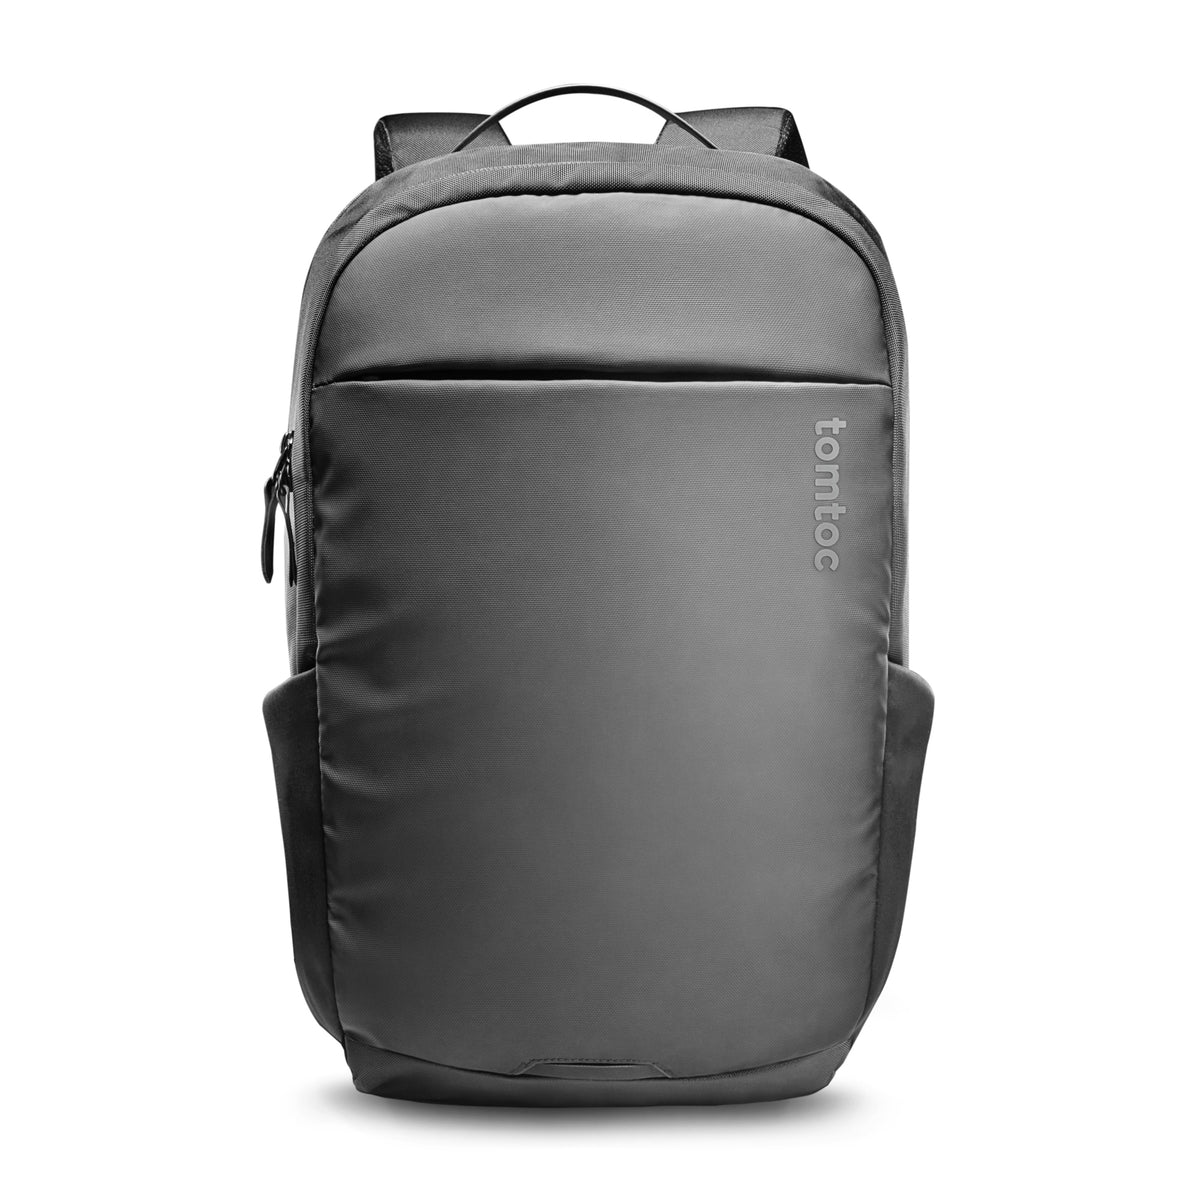 primary_Navigator-T68 Laptop Backpack with 15.6 Inch & 26L